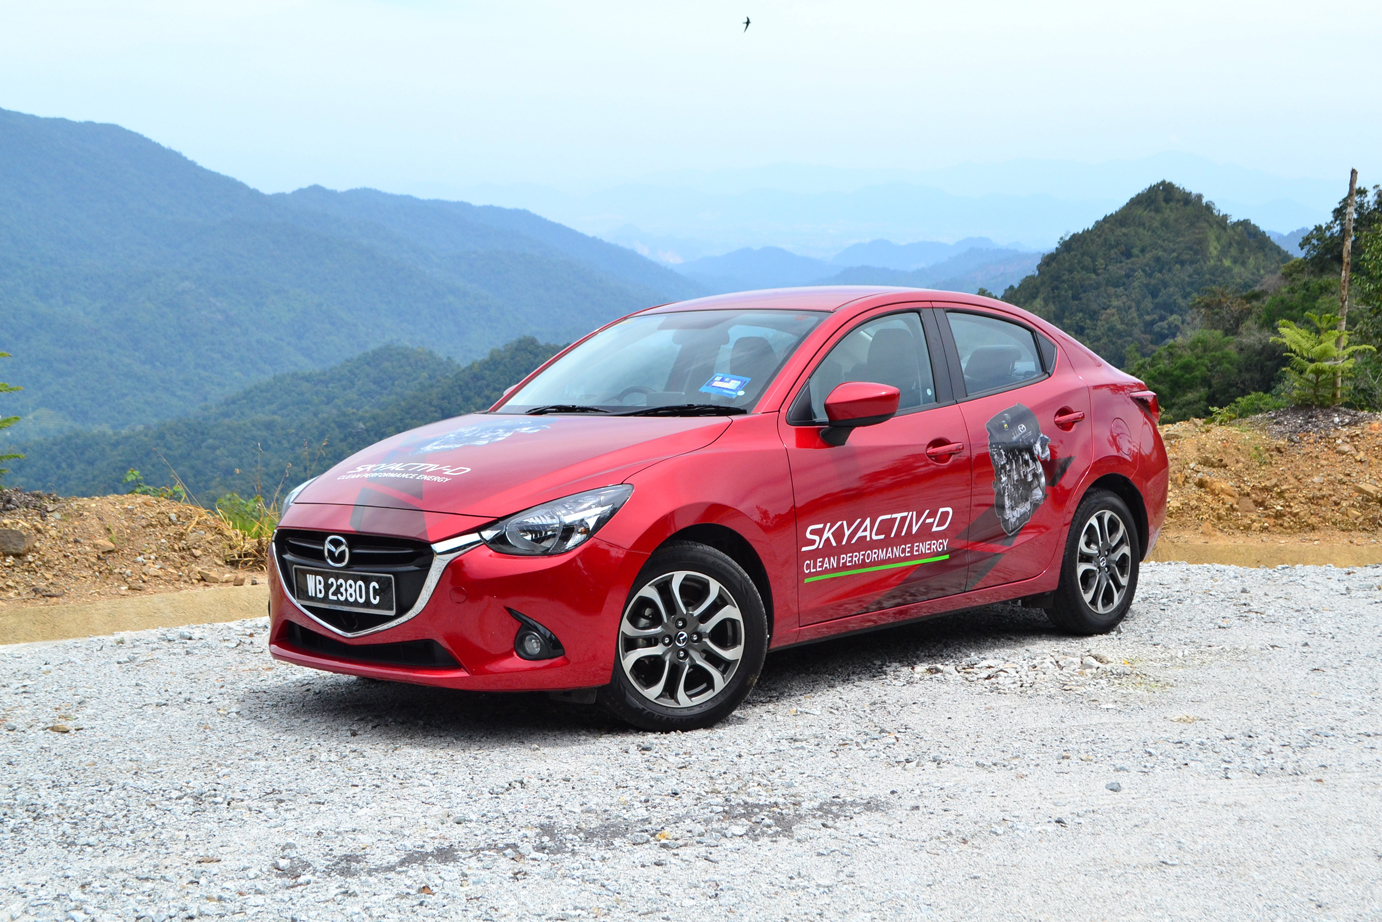 The Mazda 2 Skyactiv D Sedan Great Things Come In Small Packages Kensomuse